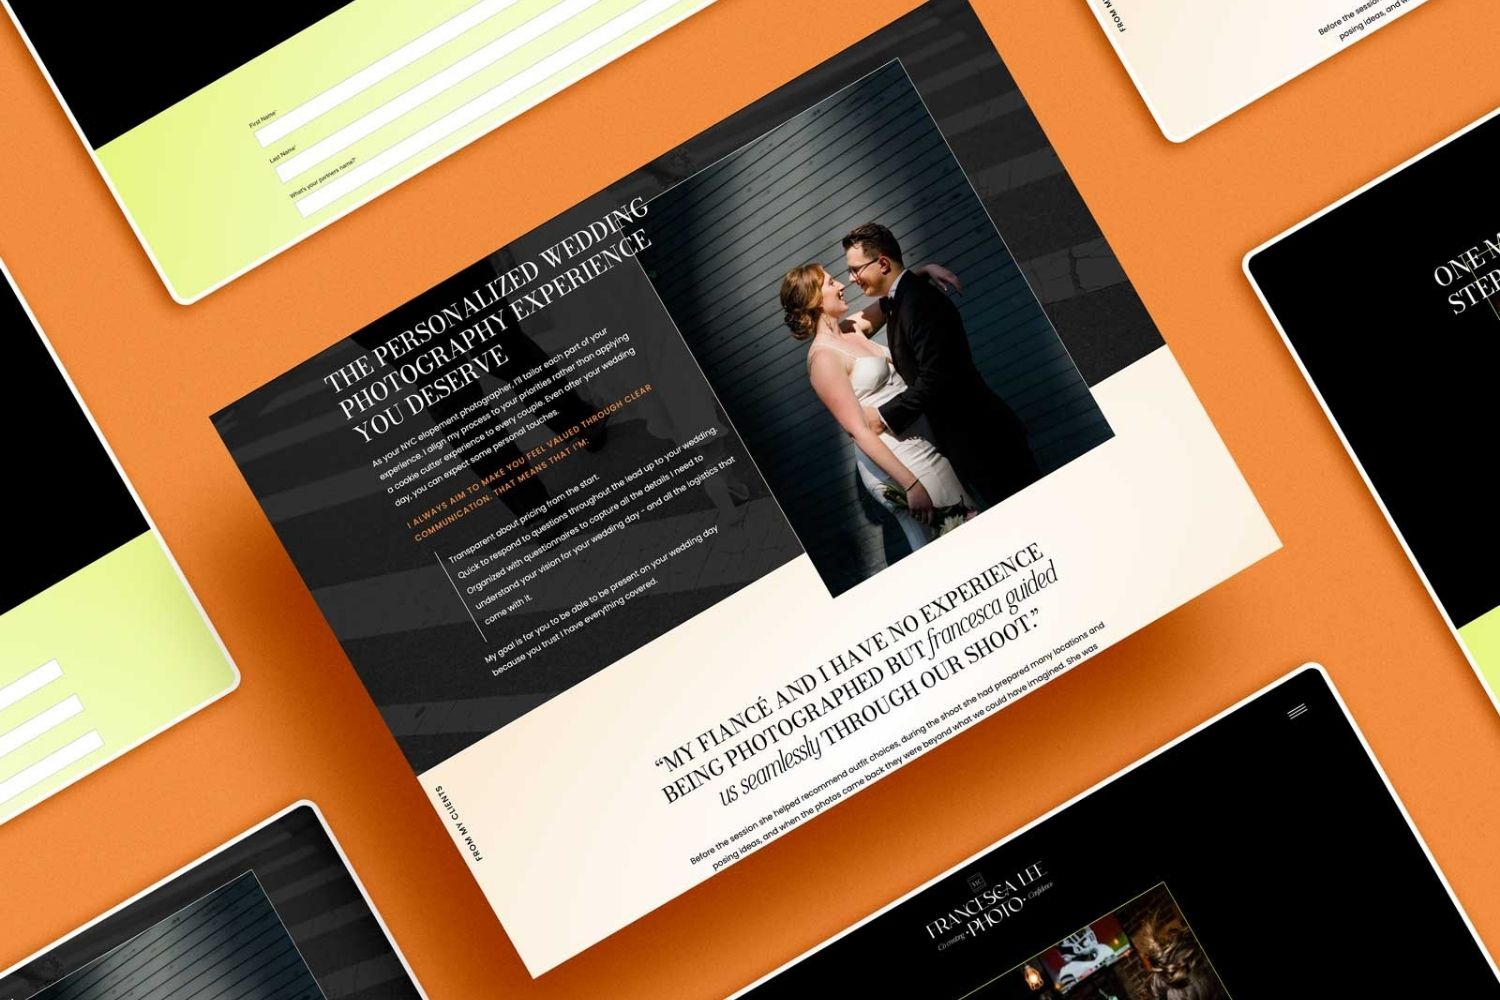 A luxe website design is pulled up on screen mockups with orange background.